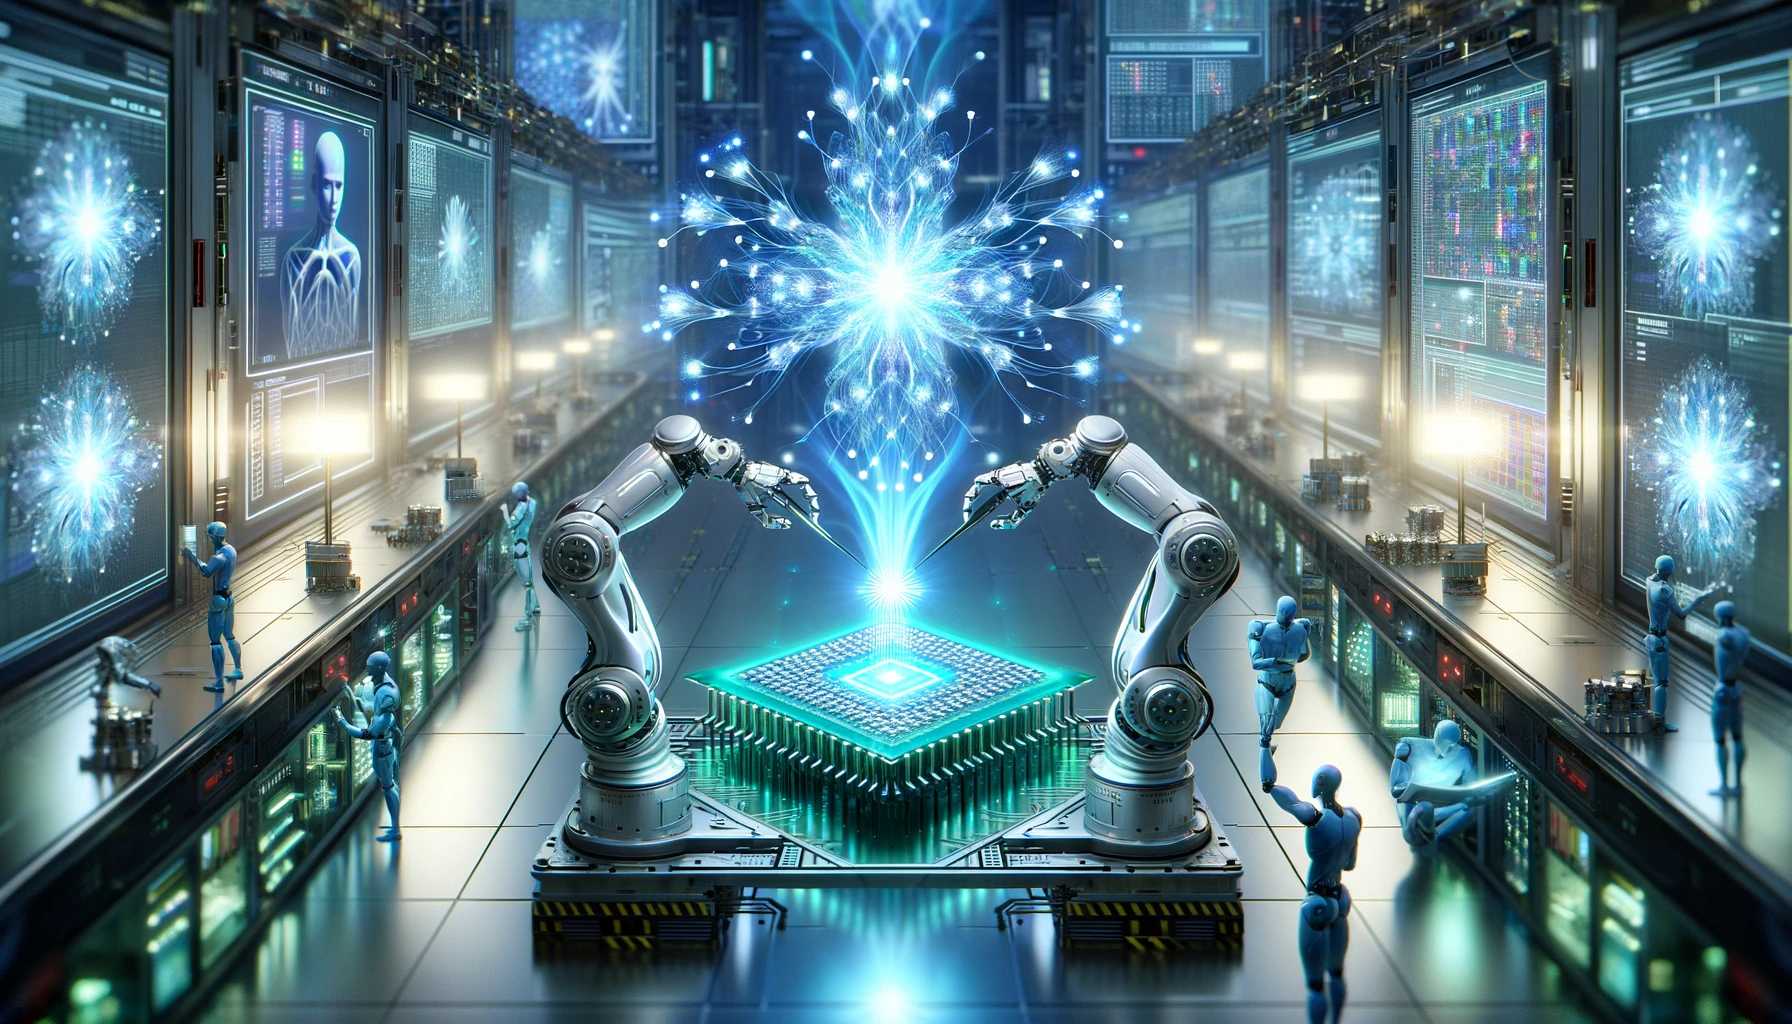 CHINA CREATES NEW LIGHT-BASED CHIPS THAT COULD ENABLE ARTIFICIAL INTELLIGENCE (AI) TO SURPASS HUMAN INTELLIGENCE IN GENERAL.